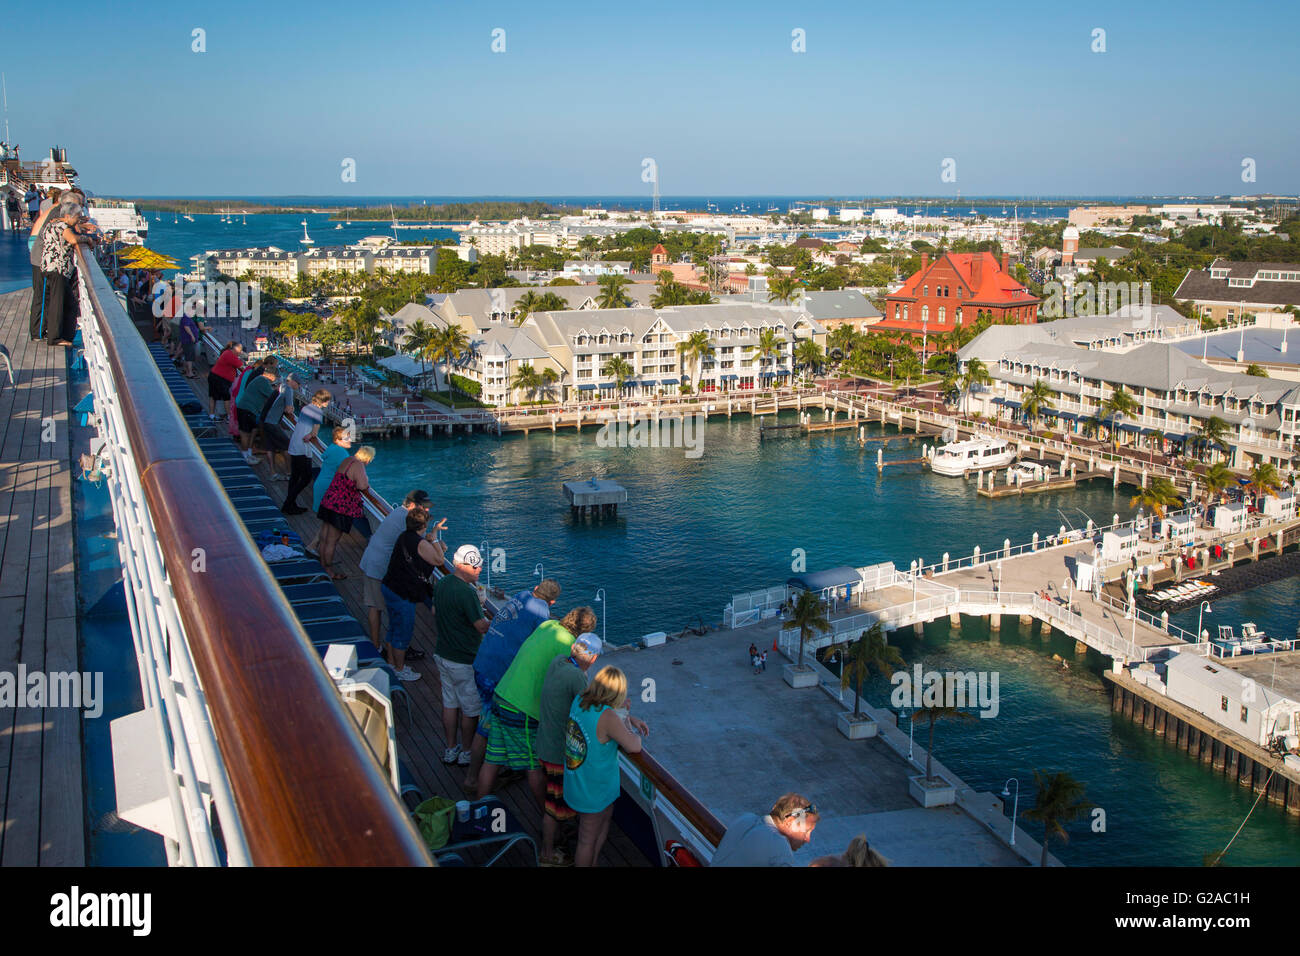 View over Key West from the deck of a cruise ship, Key West, Florida, USA Stock Photo